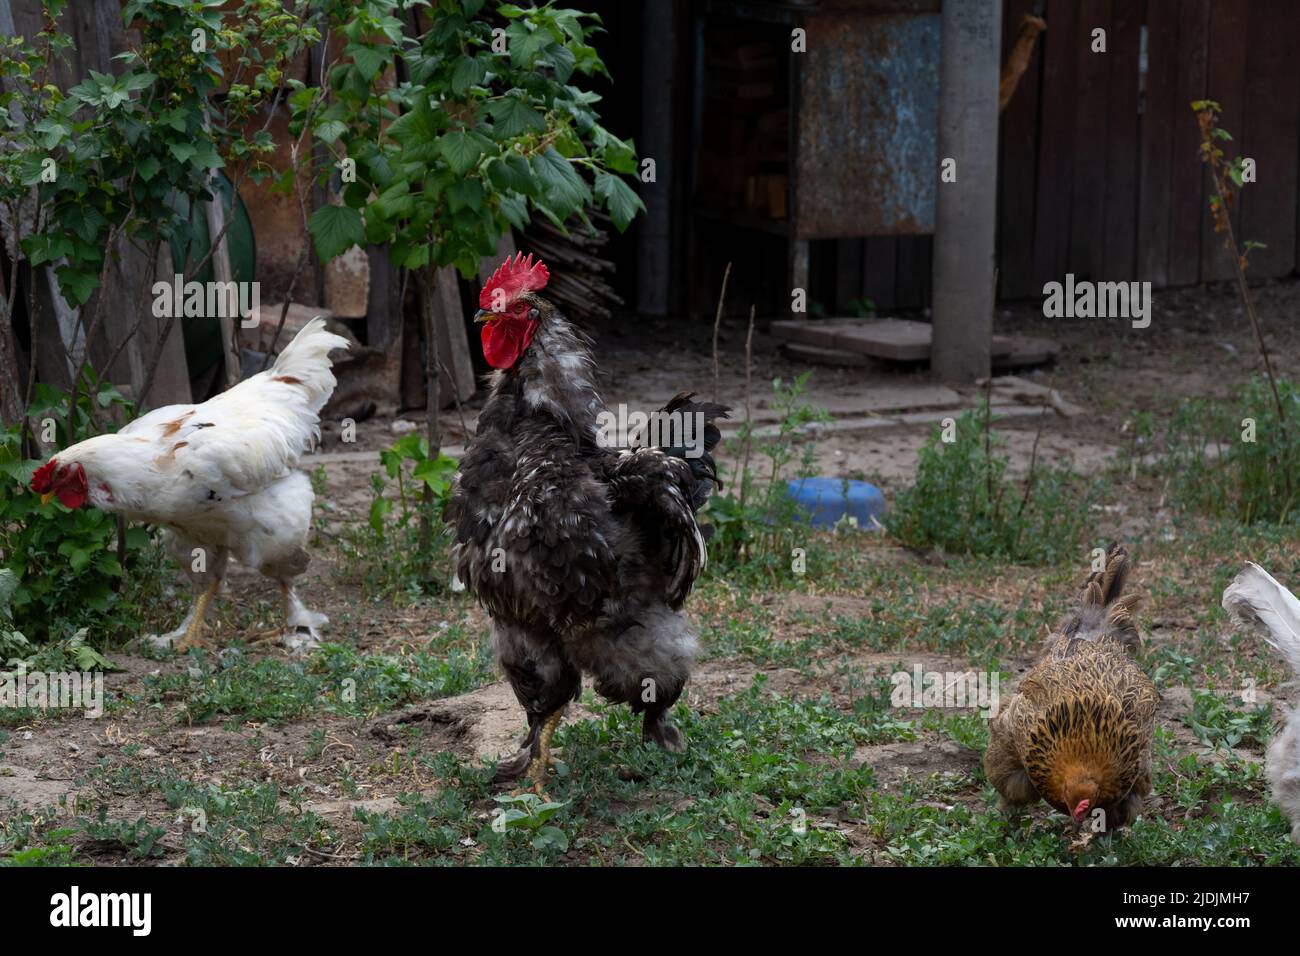 Rooster and chickens free range. Backyard Chickens. Domestic animals Stock Photo